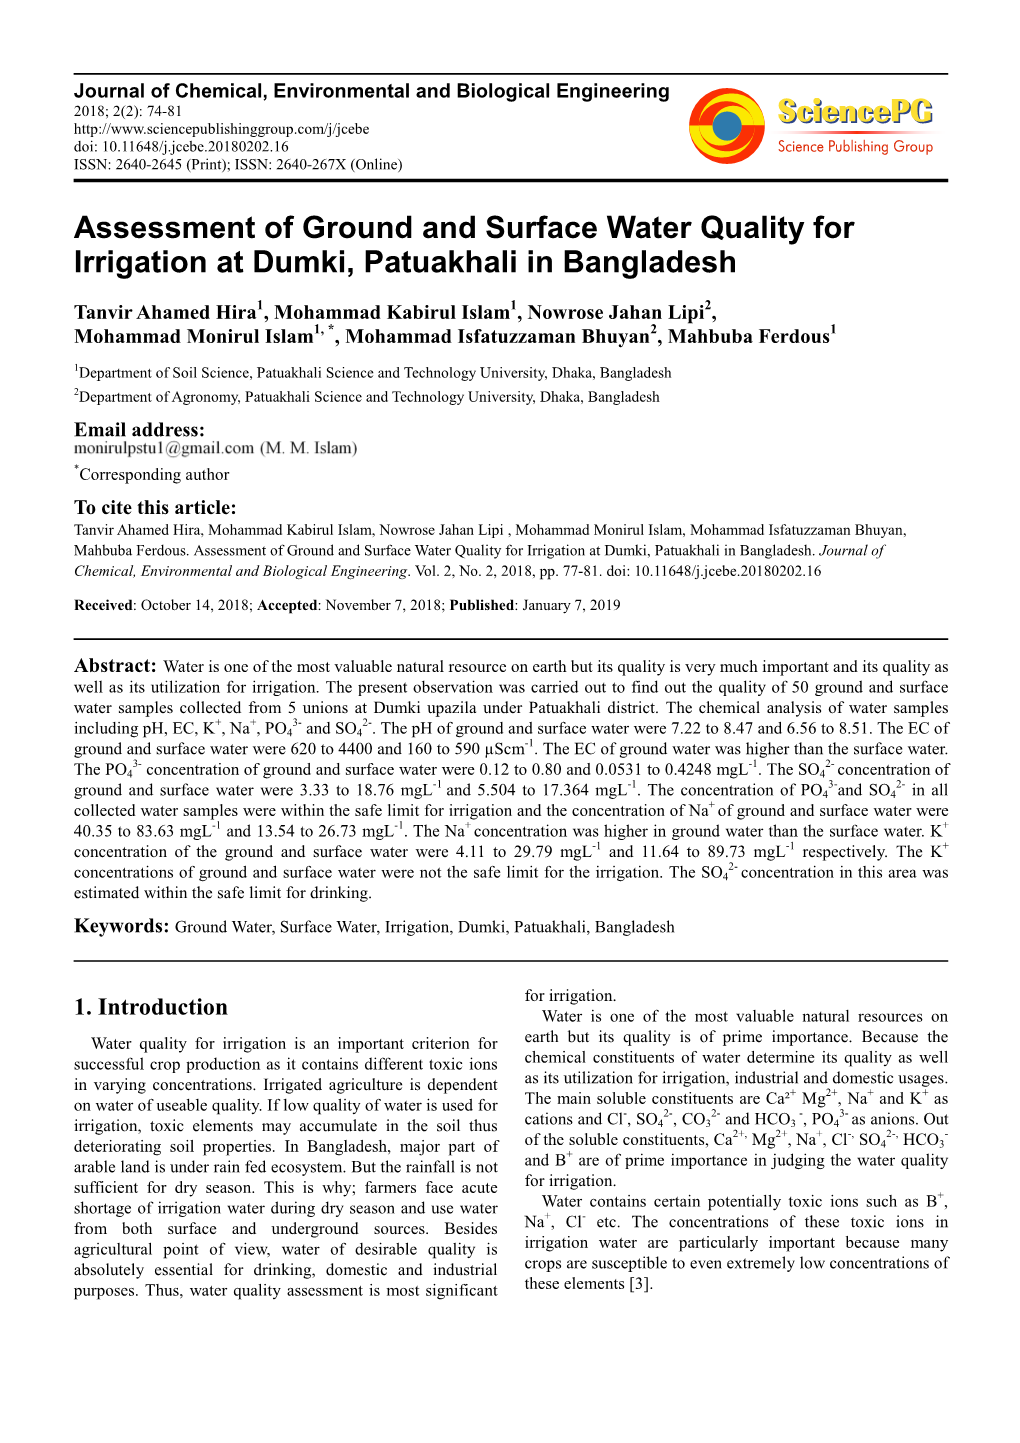 Assessment of Ground and Surface Water Quality for Irrigation at Dumki, Patuakhali in Bangladesh